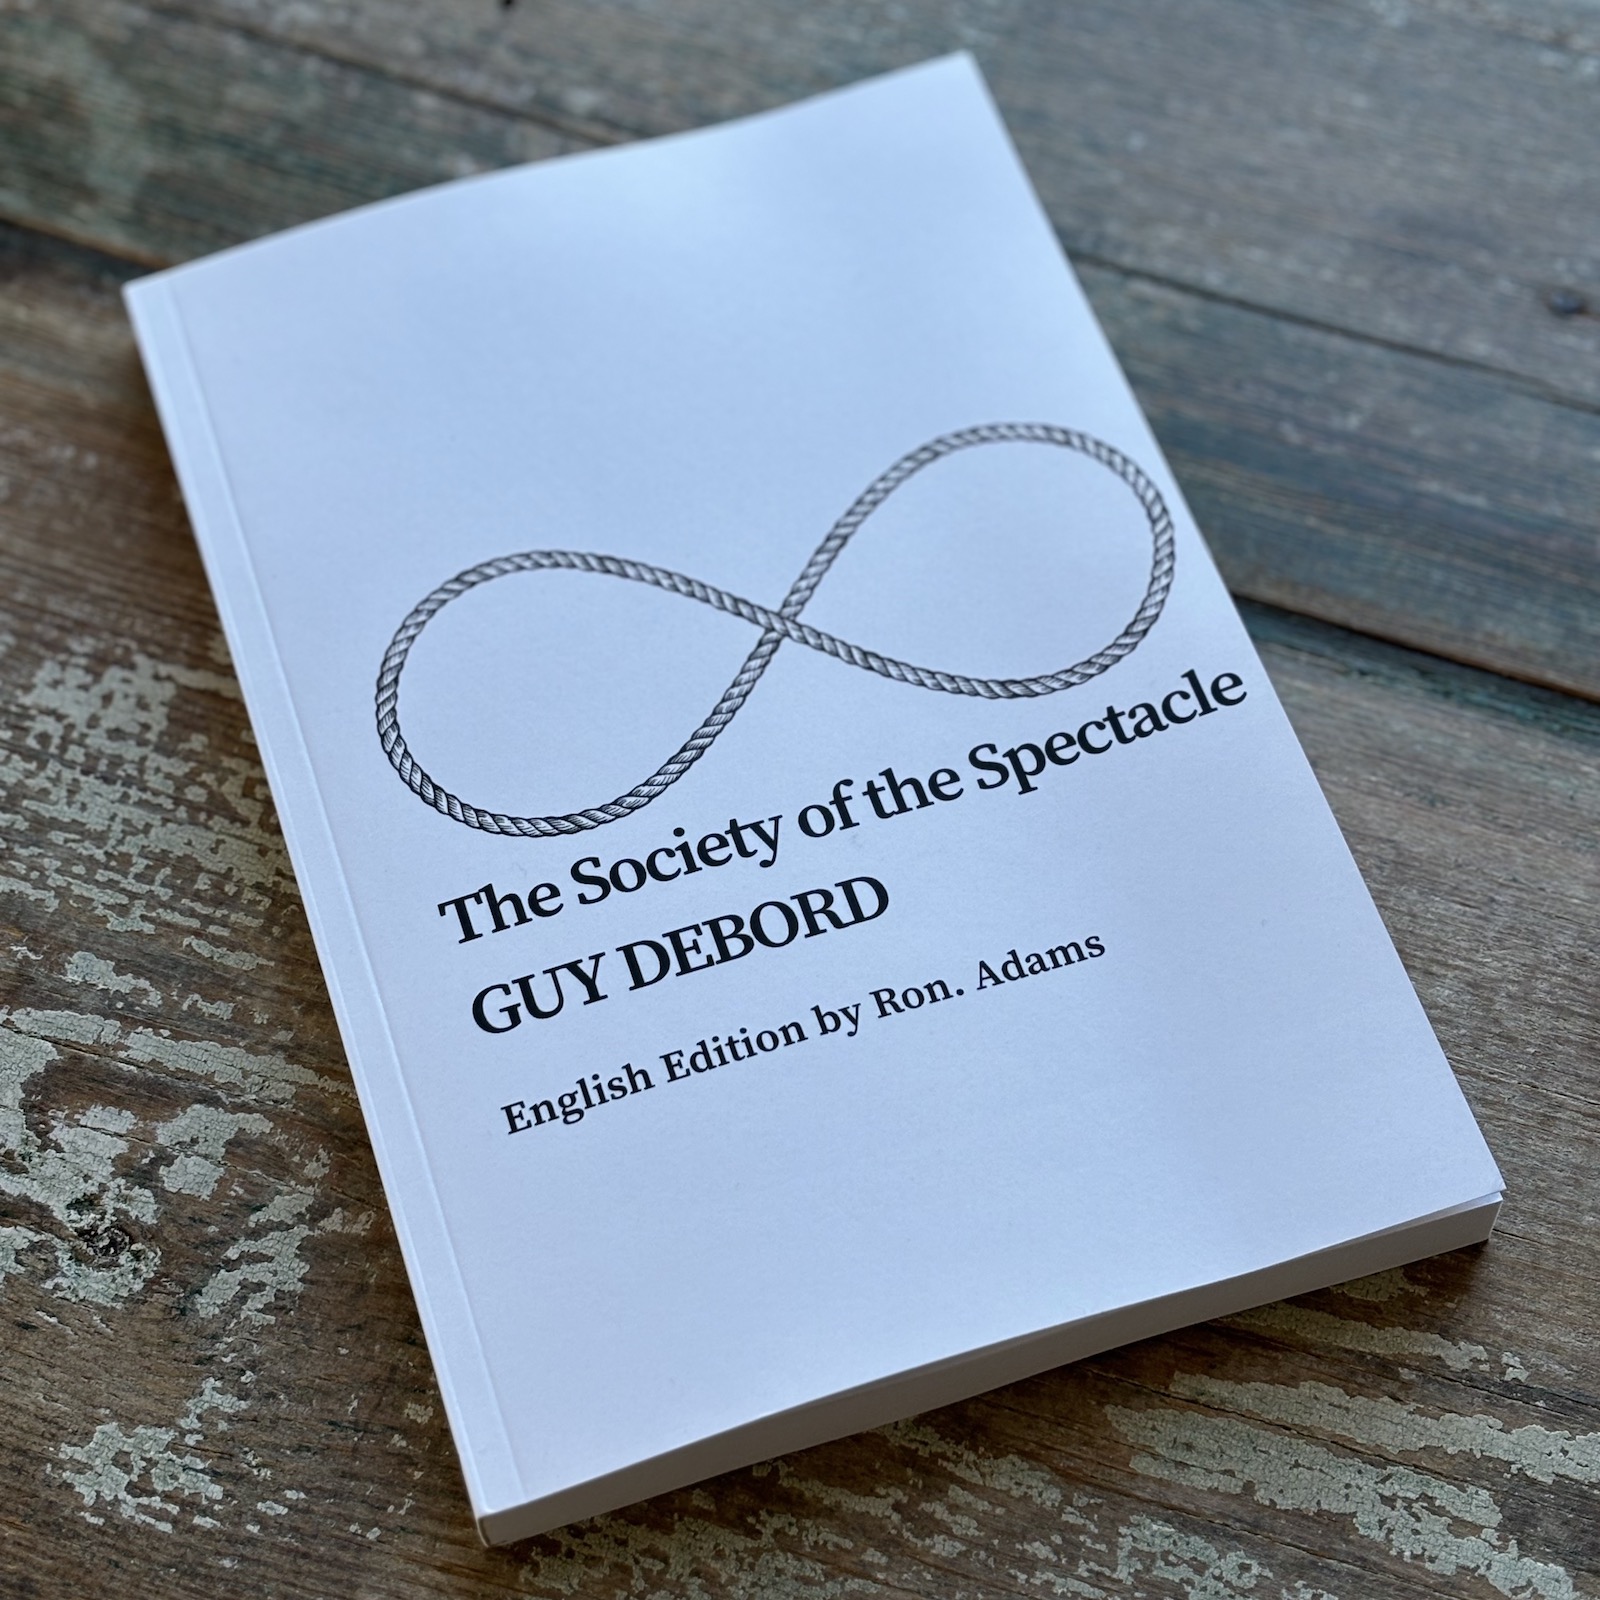 Cover of The Society of the Spectacle